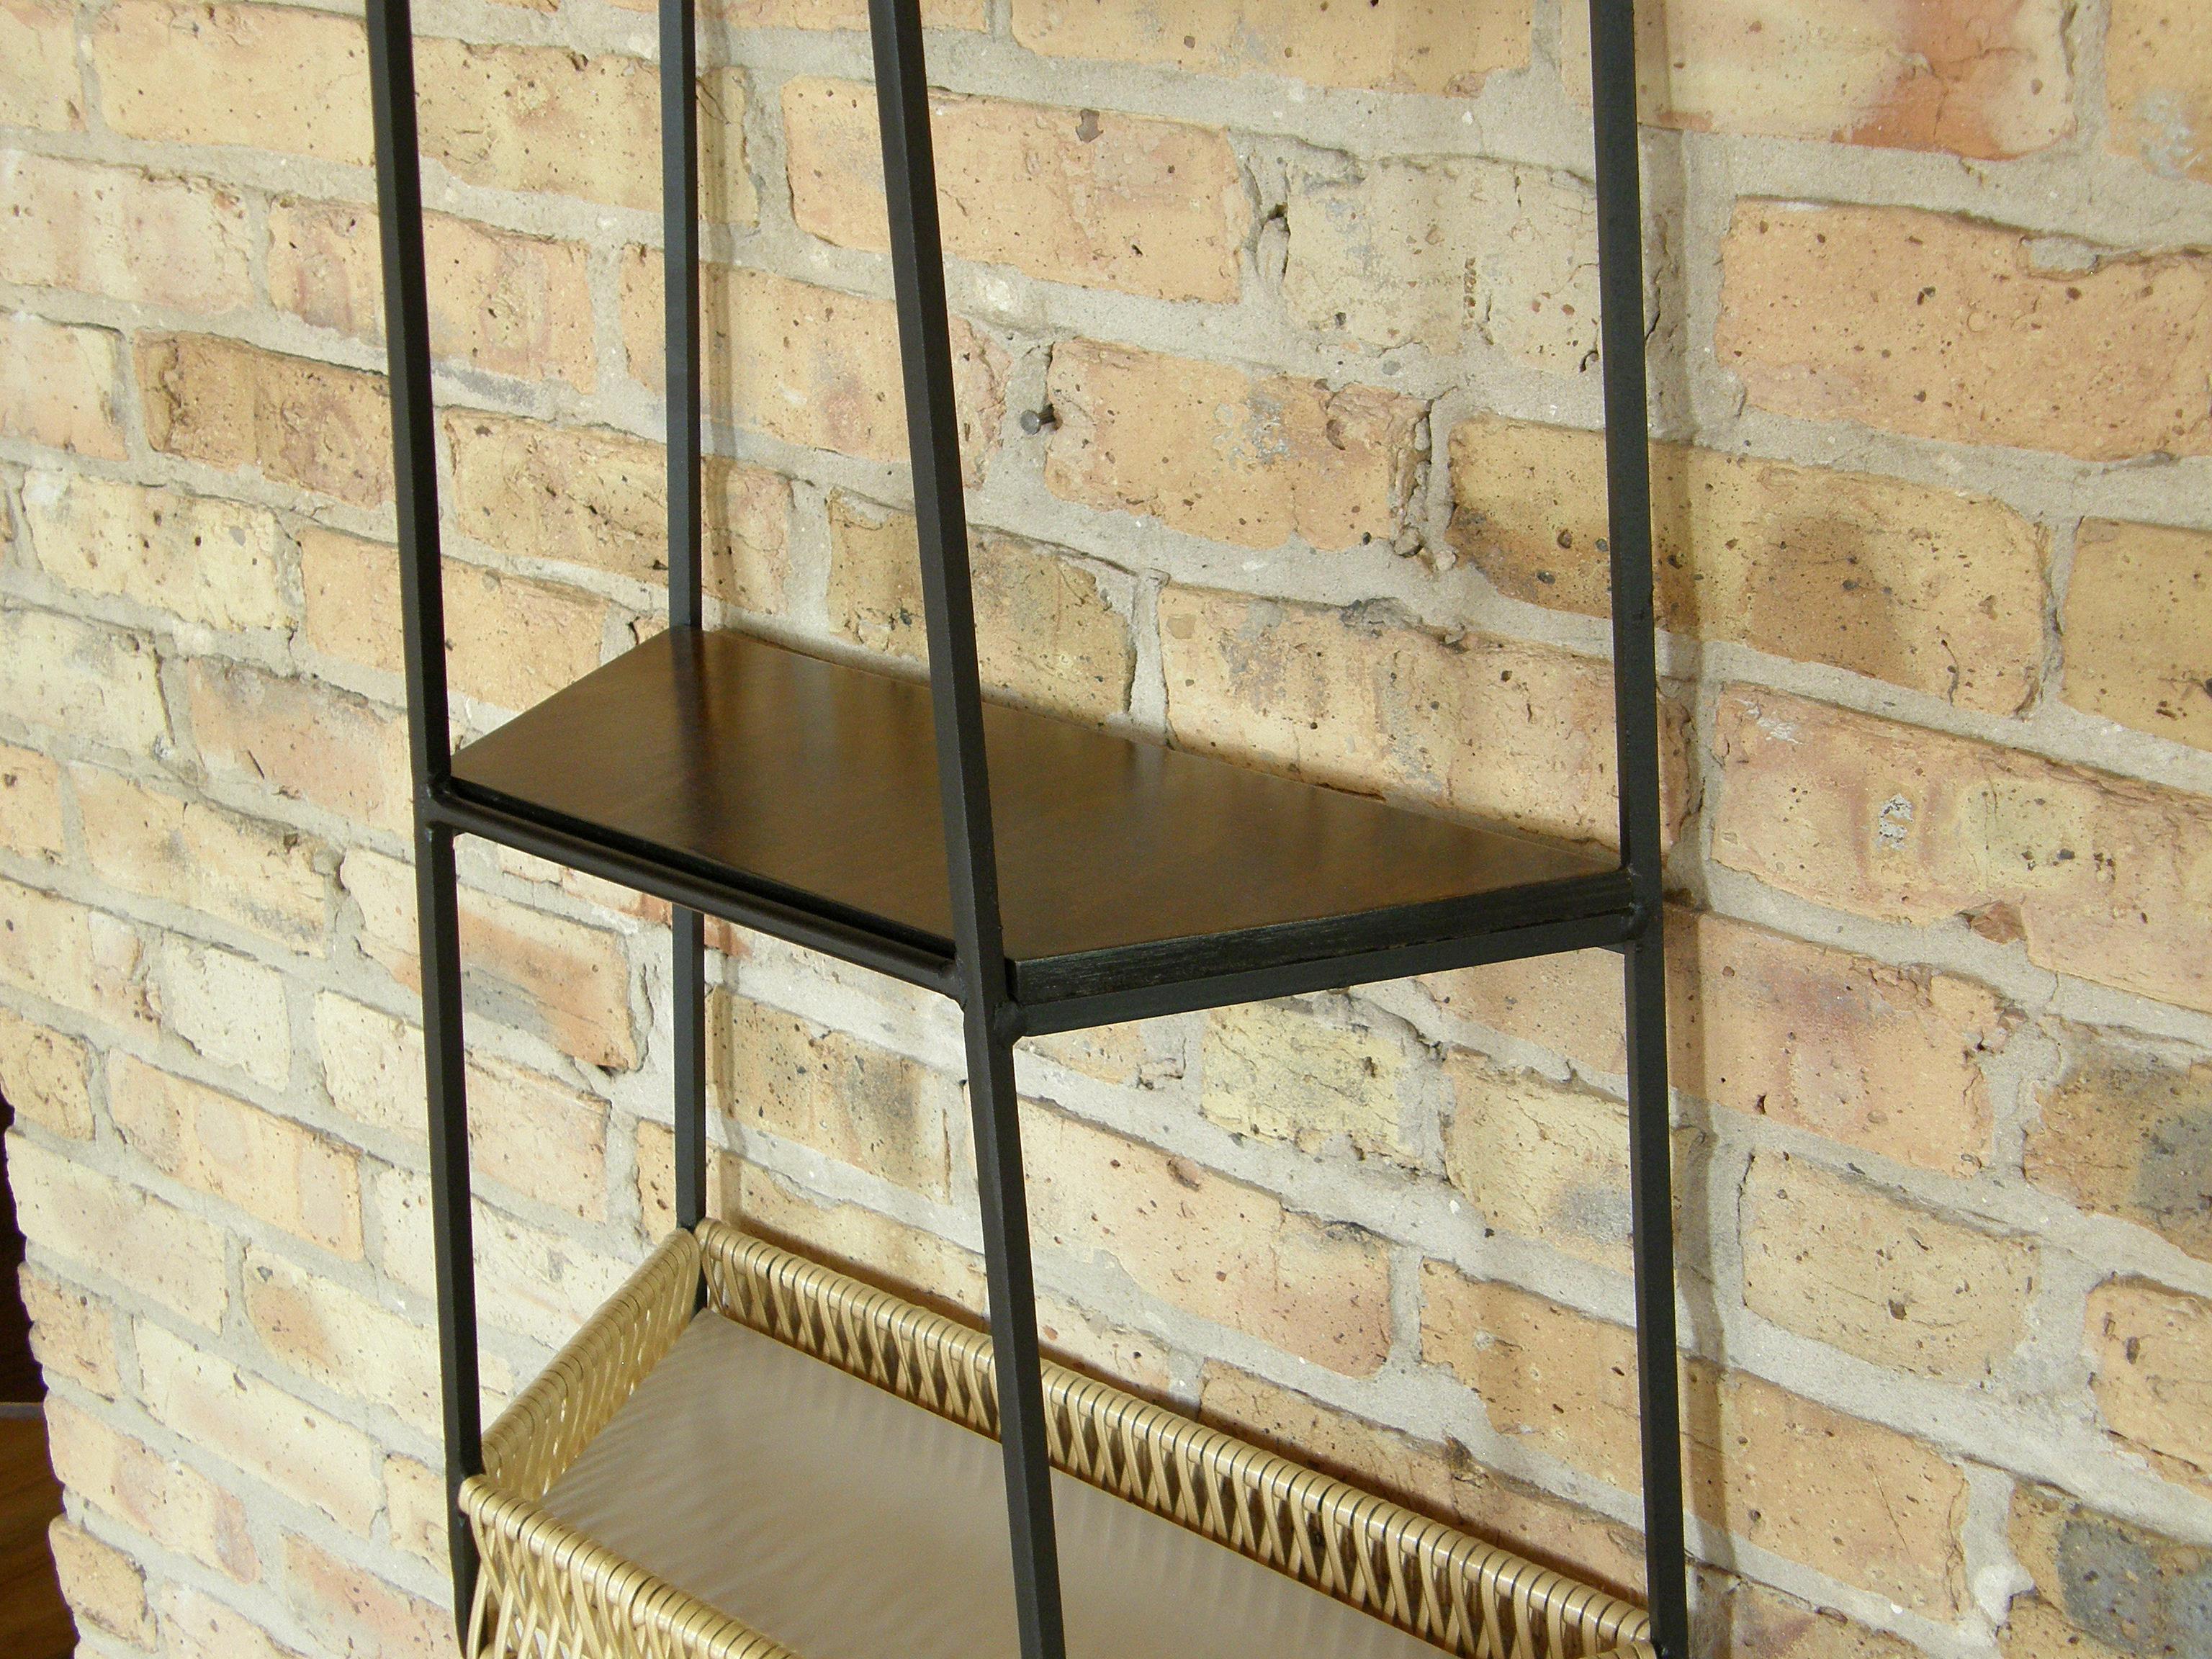 Mid-20th Century Arthur Umanoff Wall Mounted Shelf Unit for Shaver Howard with Wrought Iron Frame